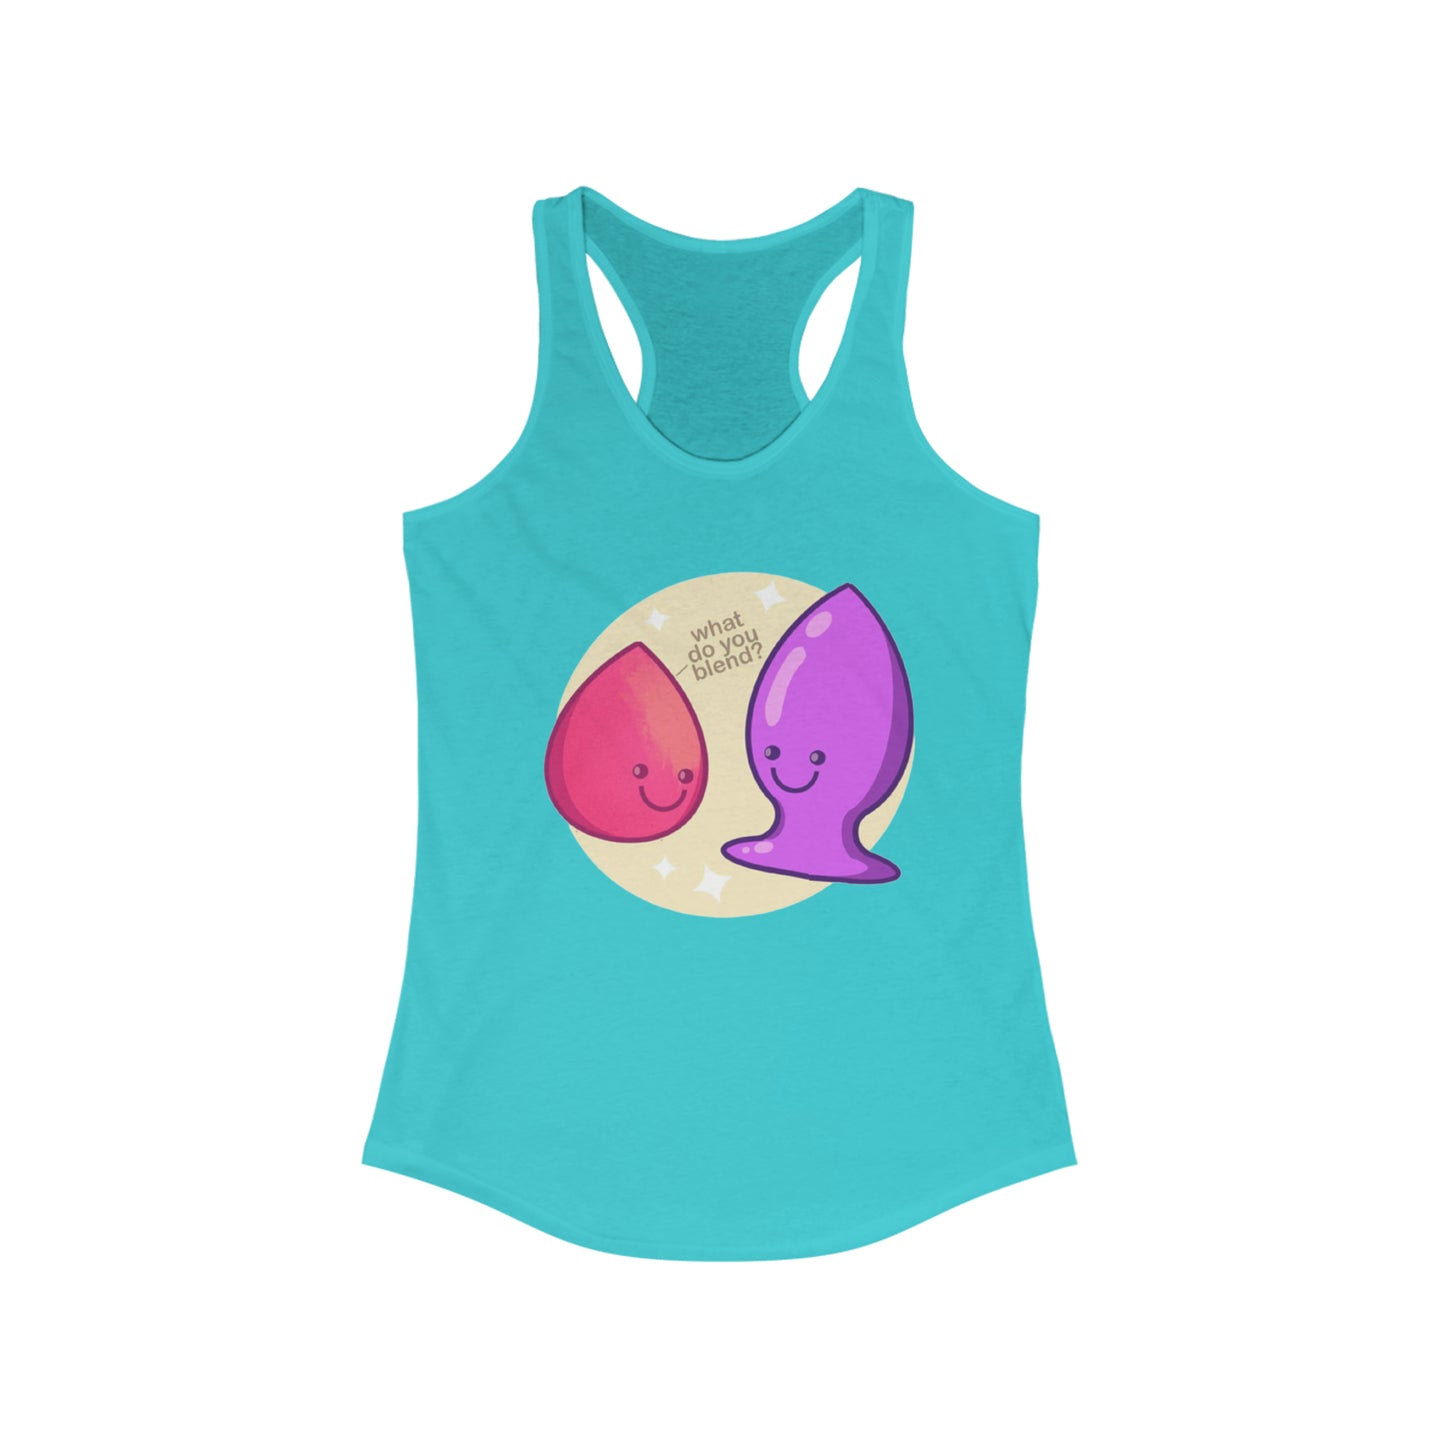 What Do You Blend? Racerback Tank